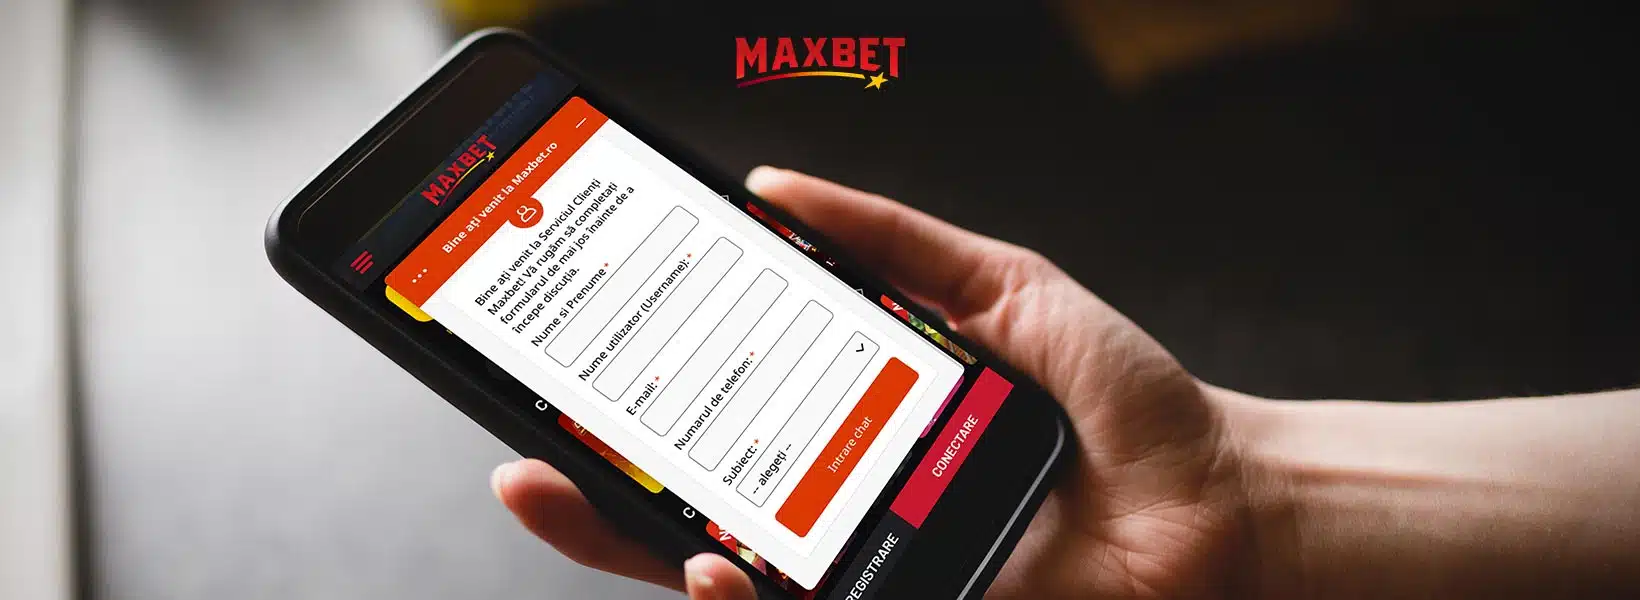 contact maxbet